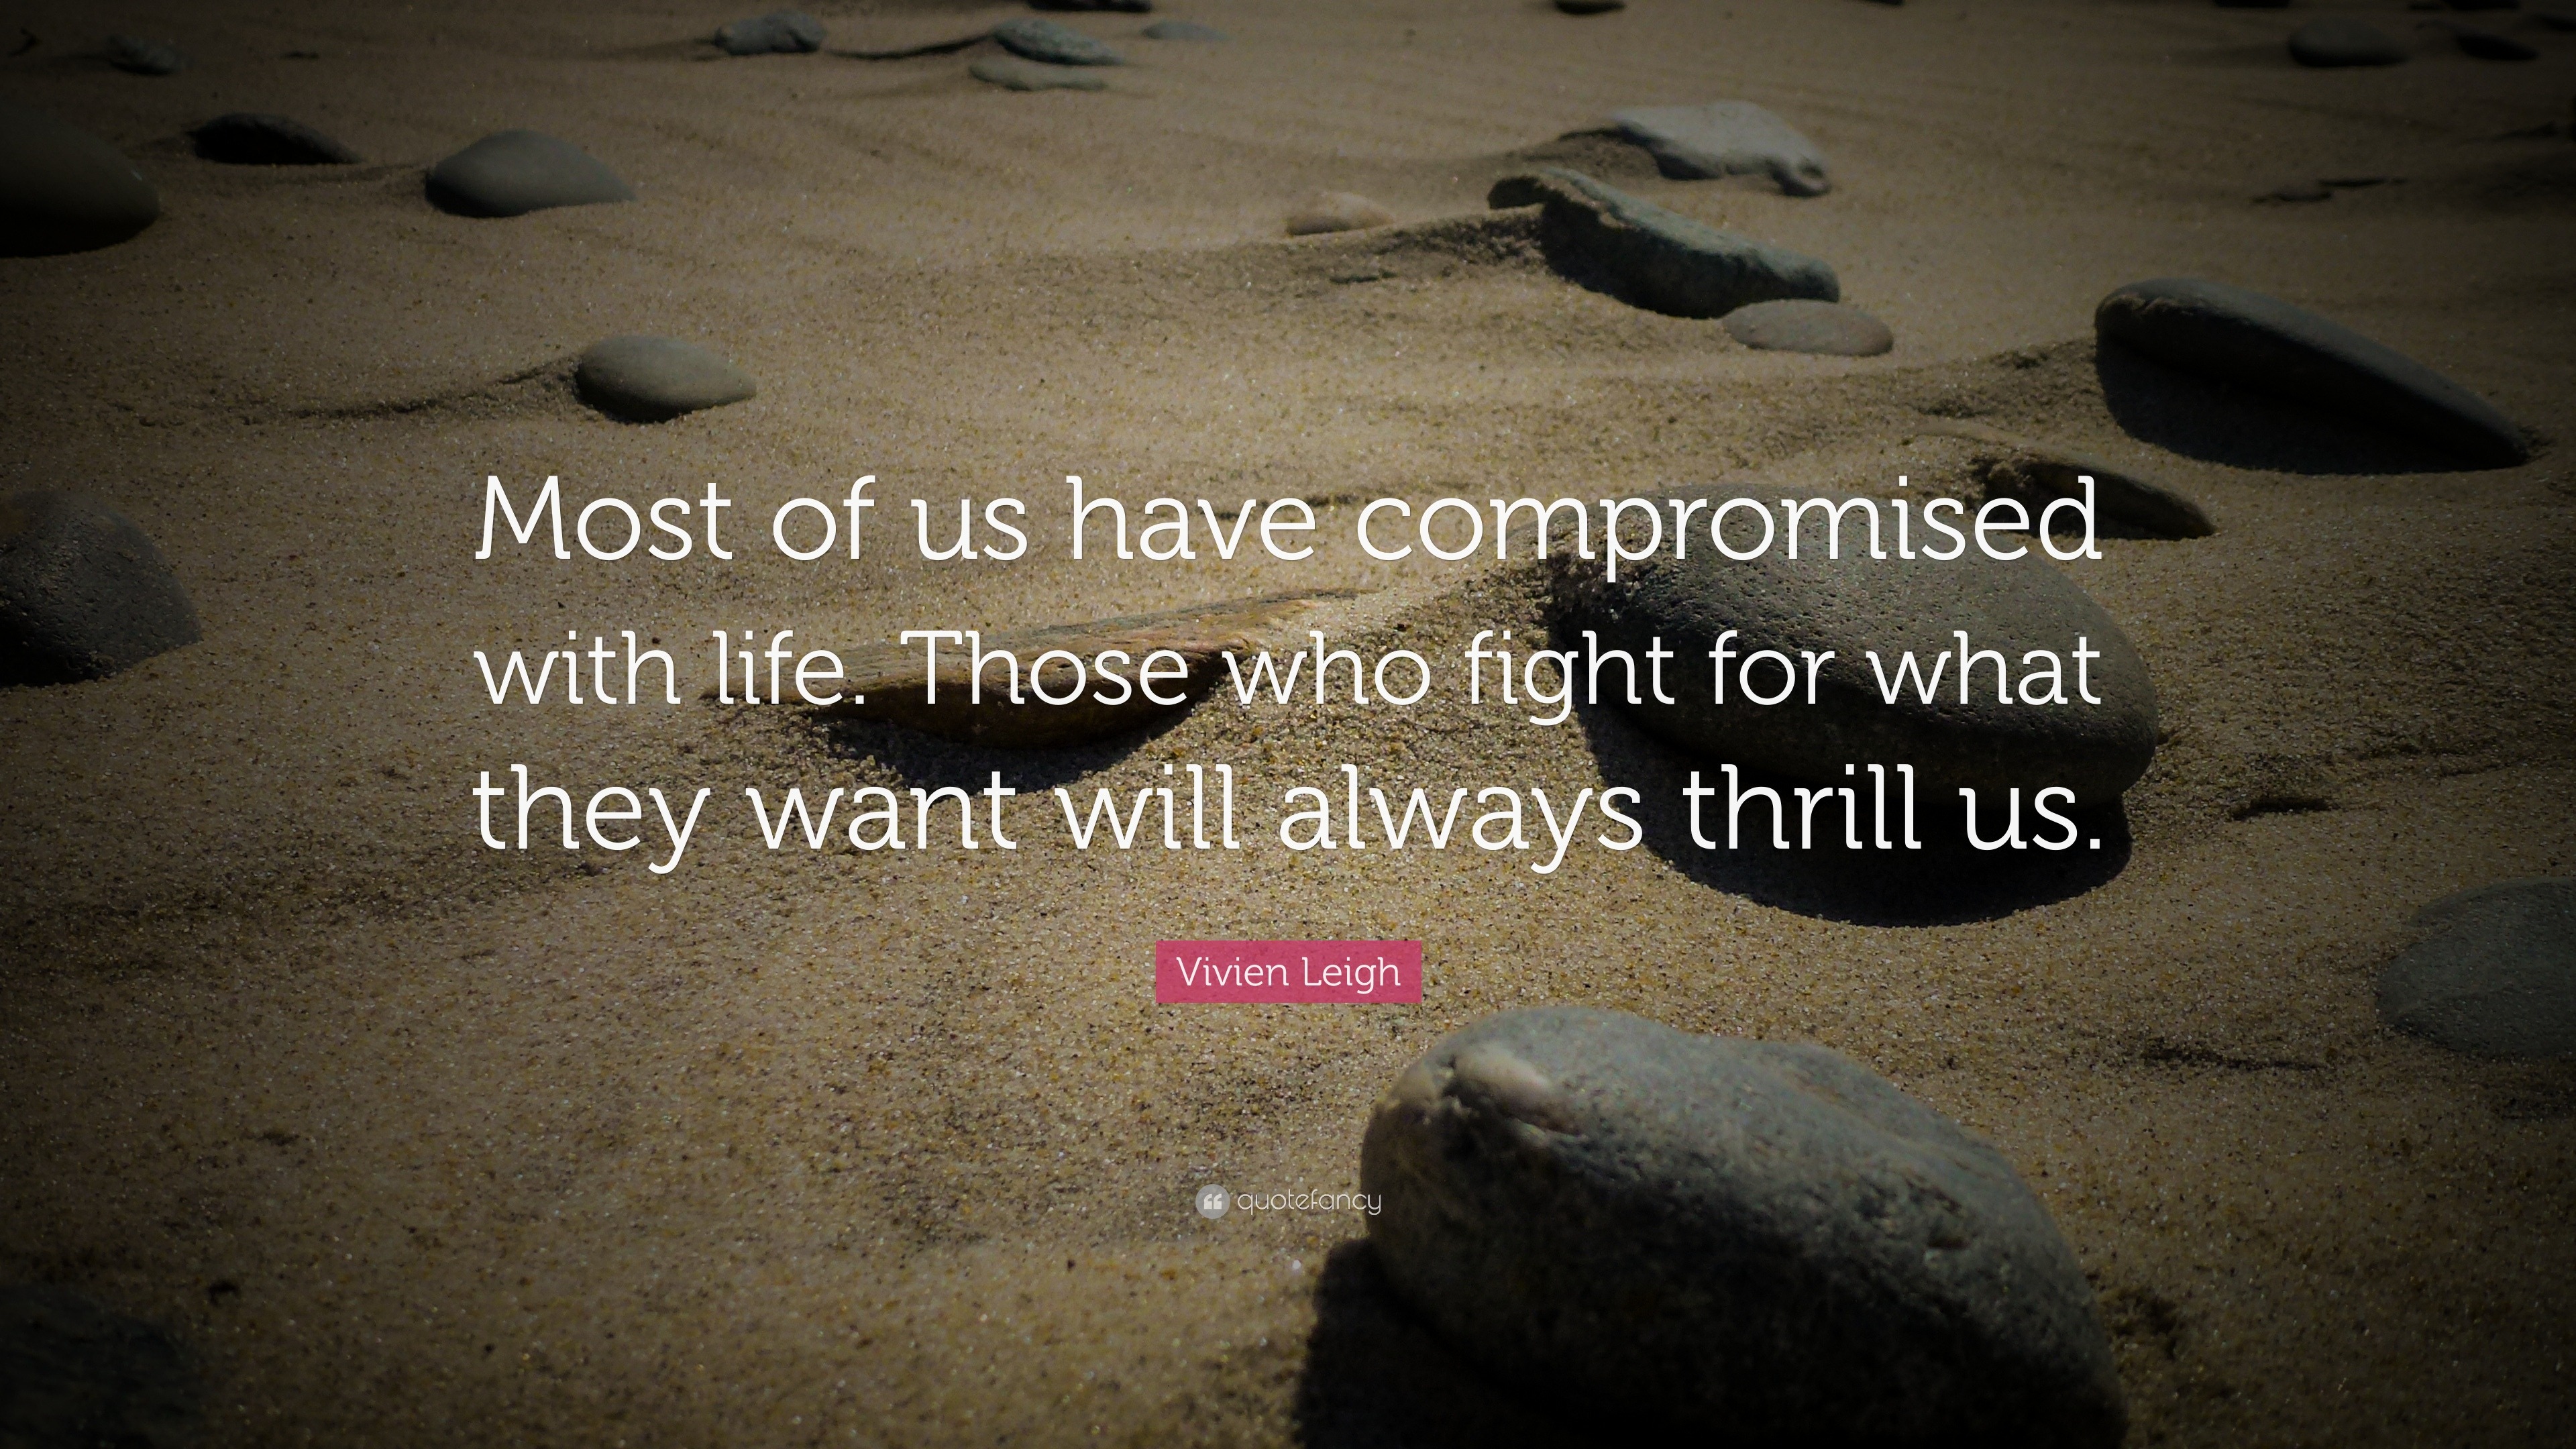 Vivien Leigh Quote: “Most of us have compromised with life. Those who ...